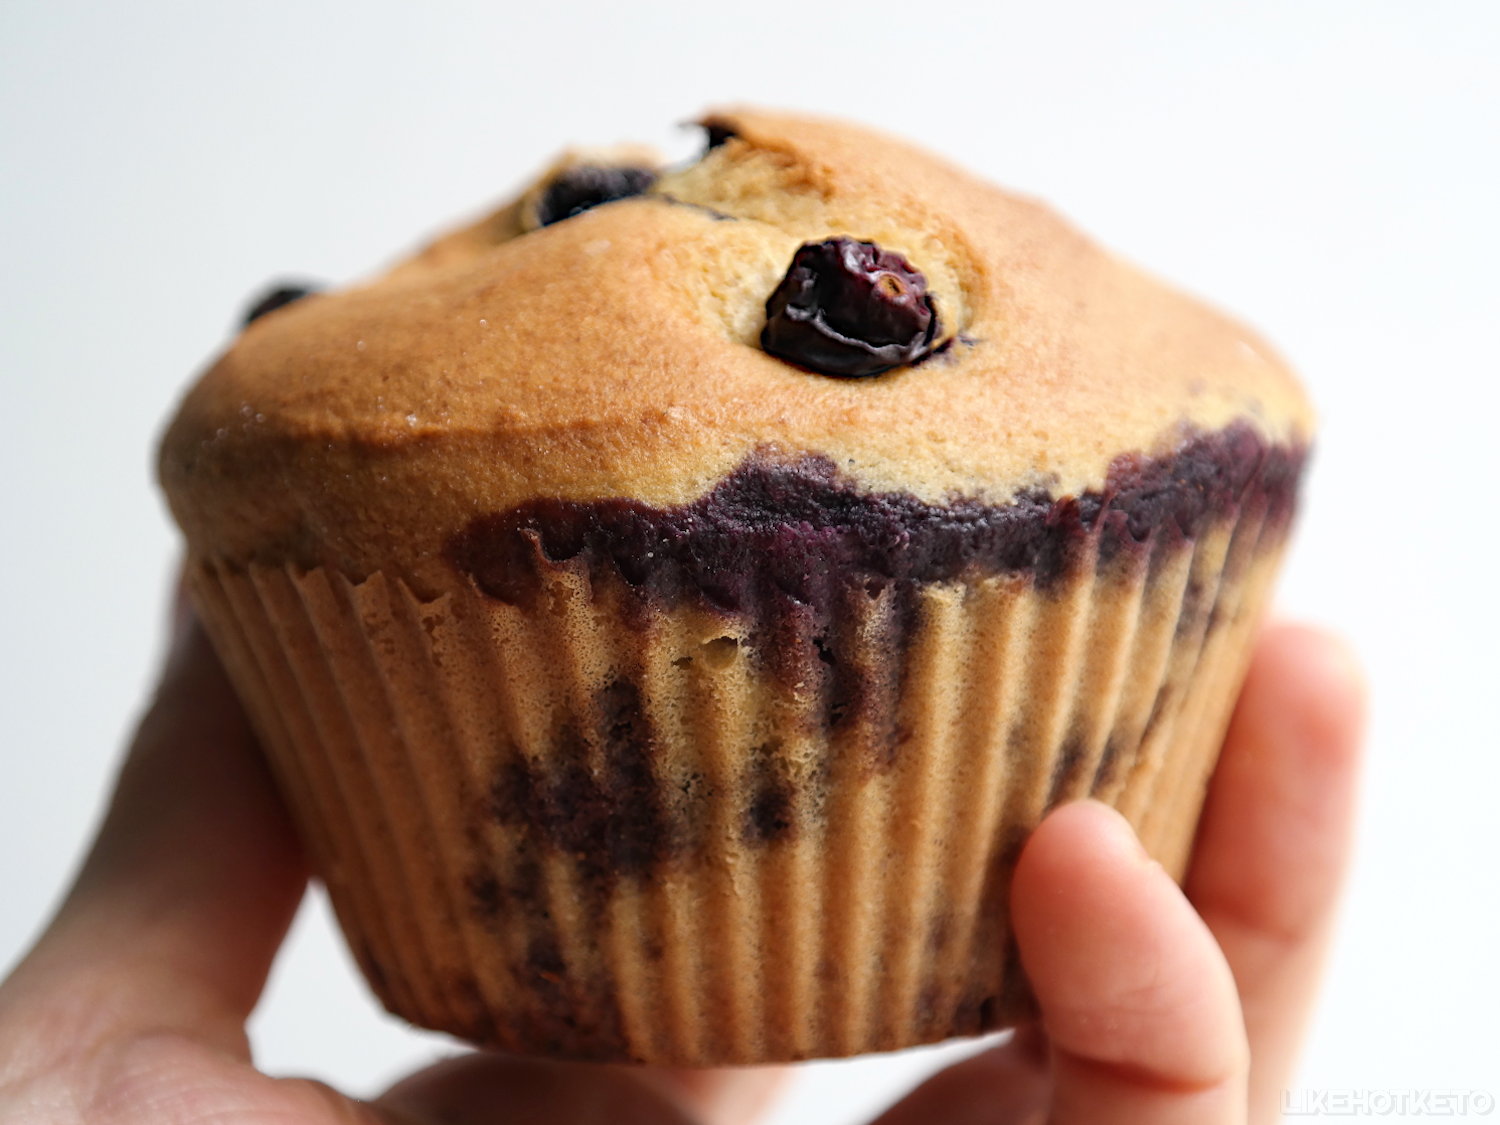 A huge blueberry muffin.